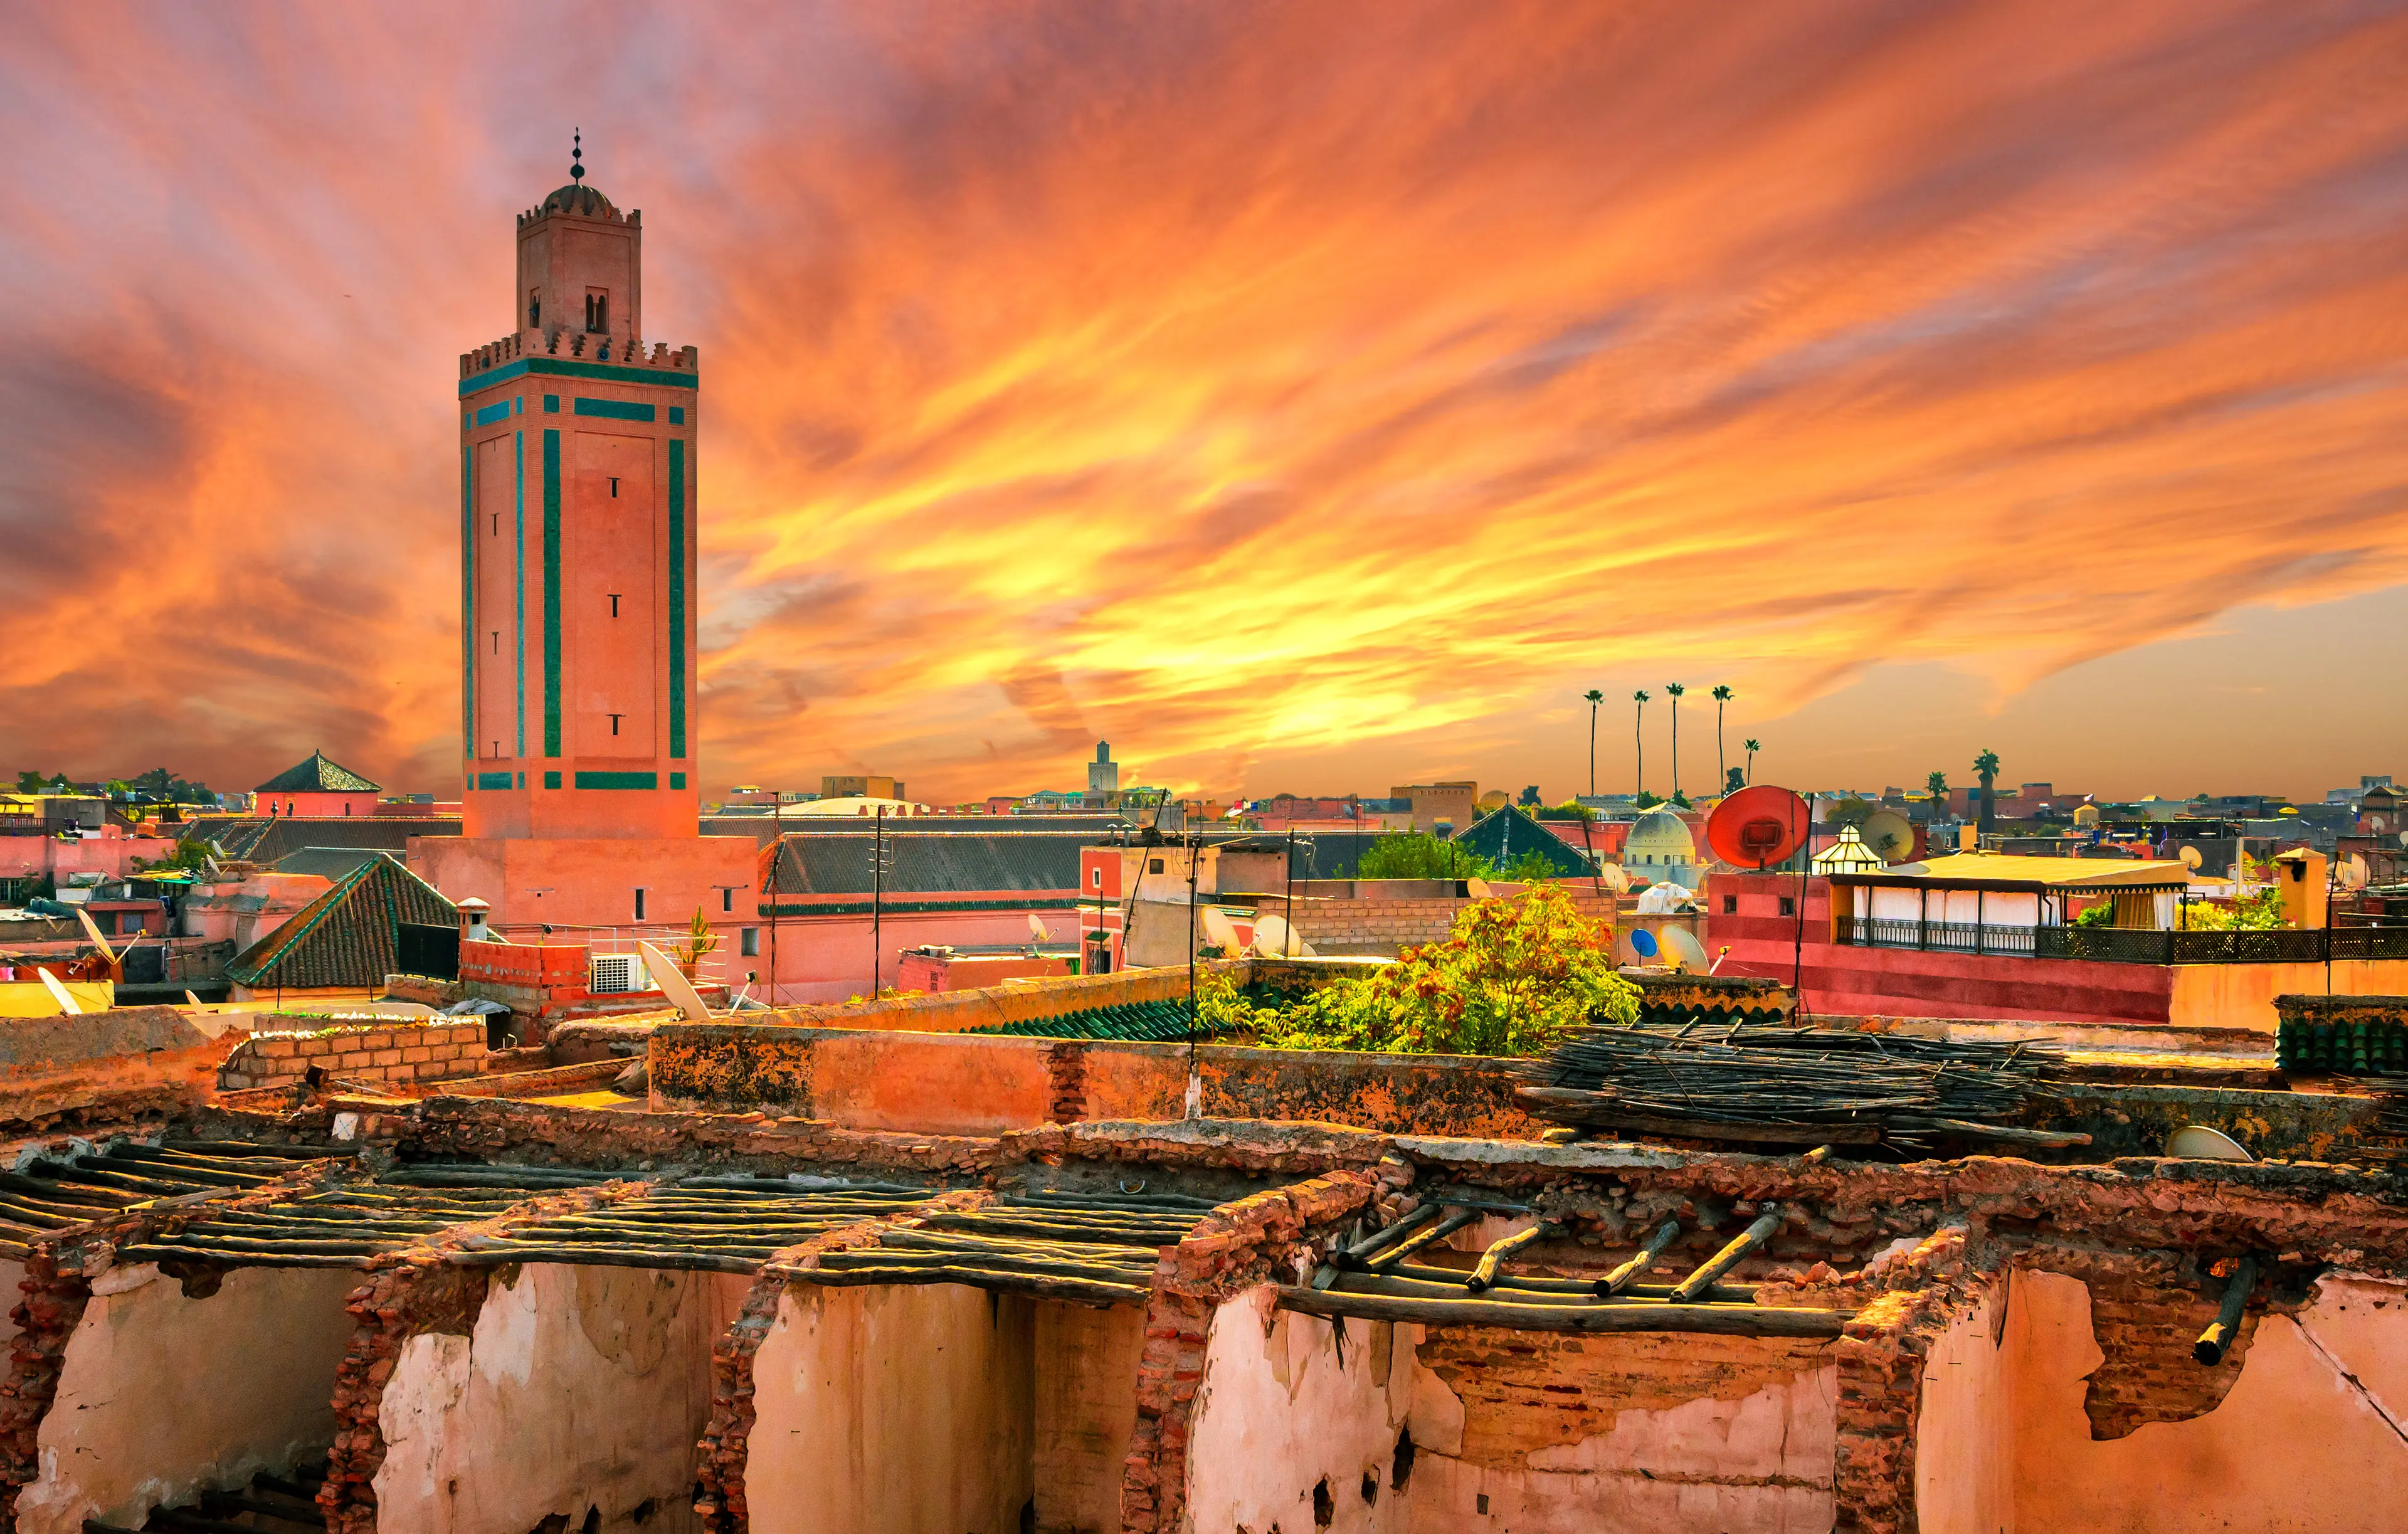 1-Day Marrakech Adventure: Unexplored Paths and Vibrant Nightlife with Friends